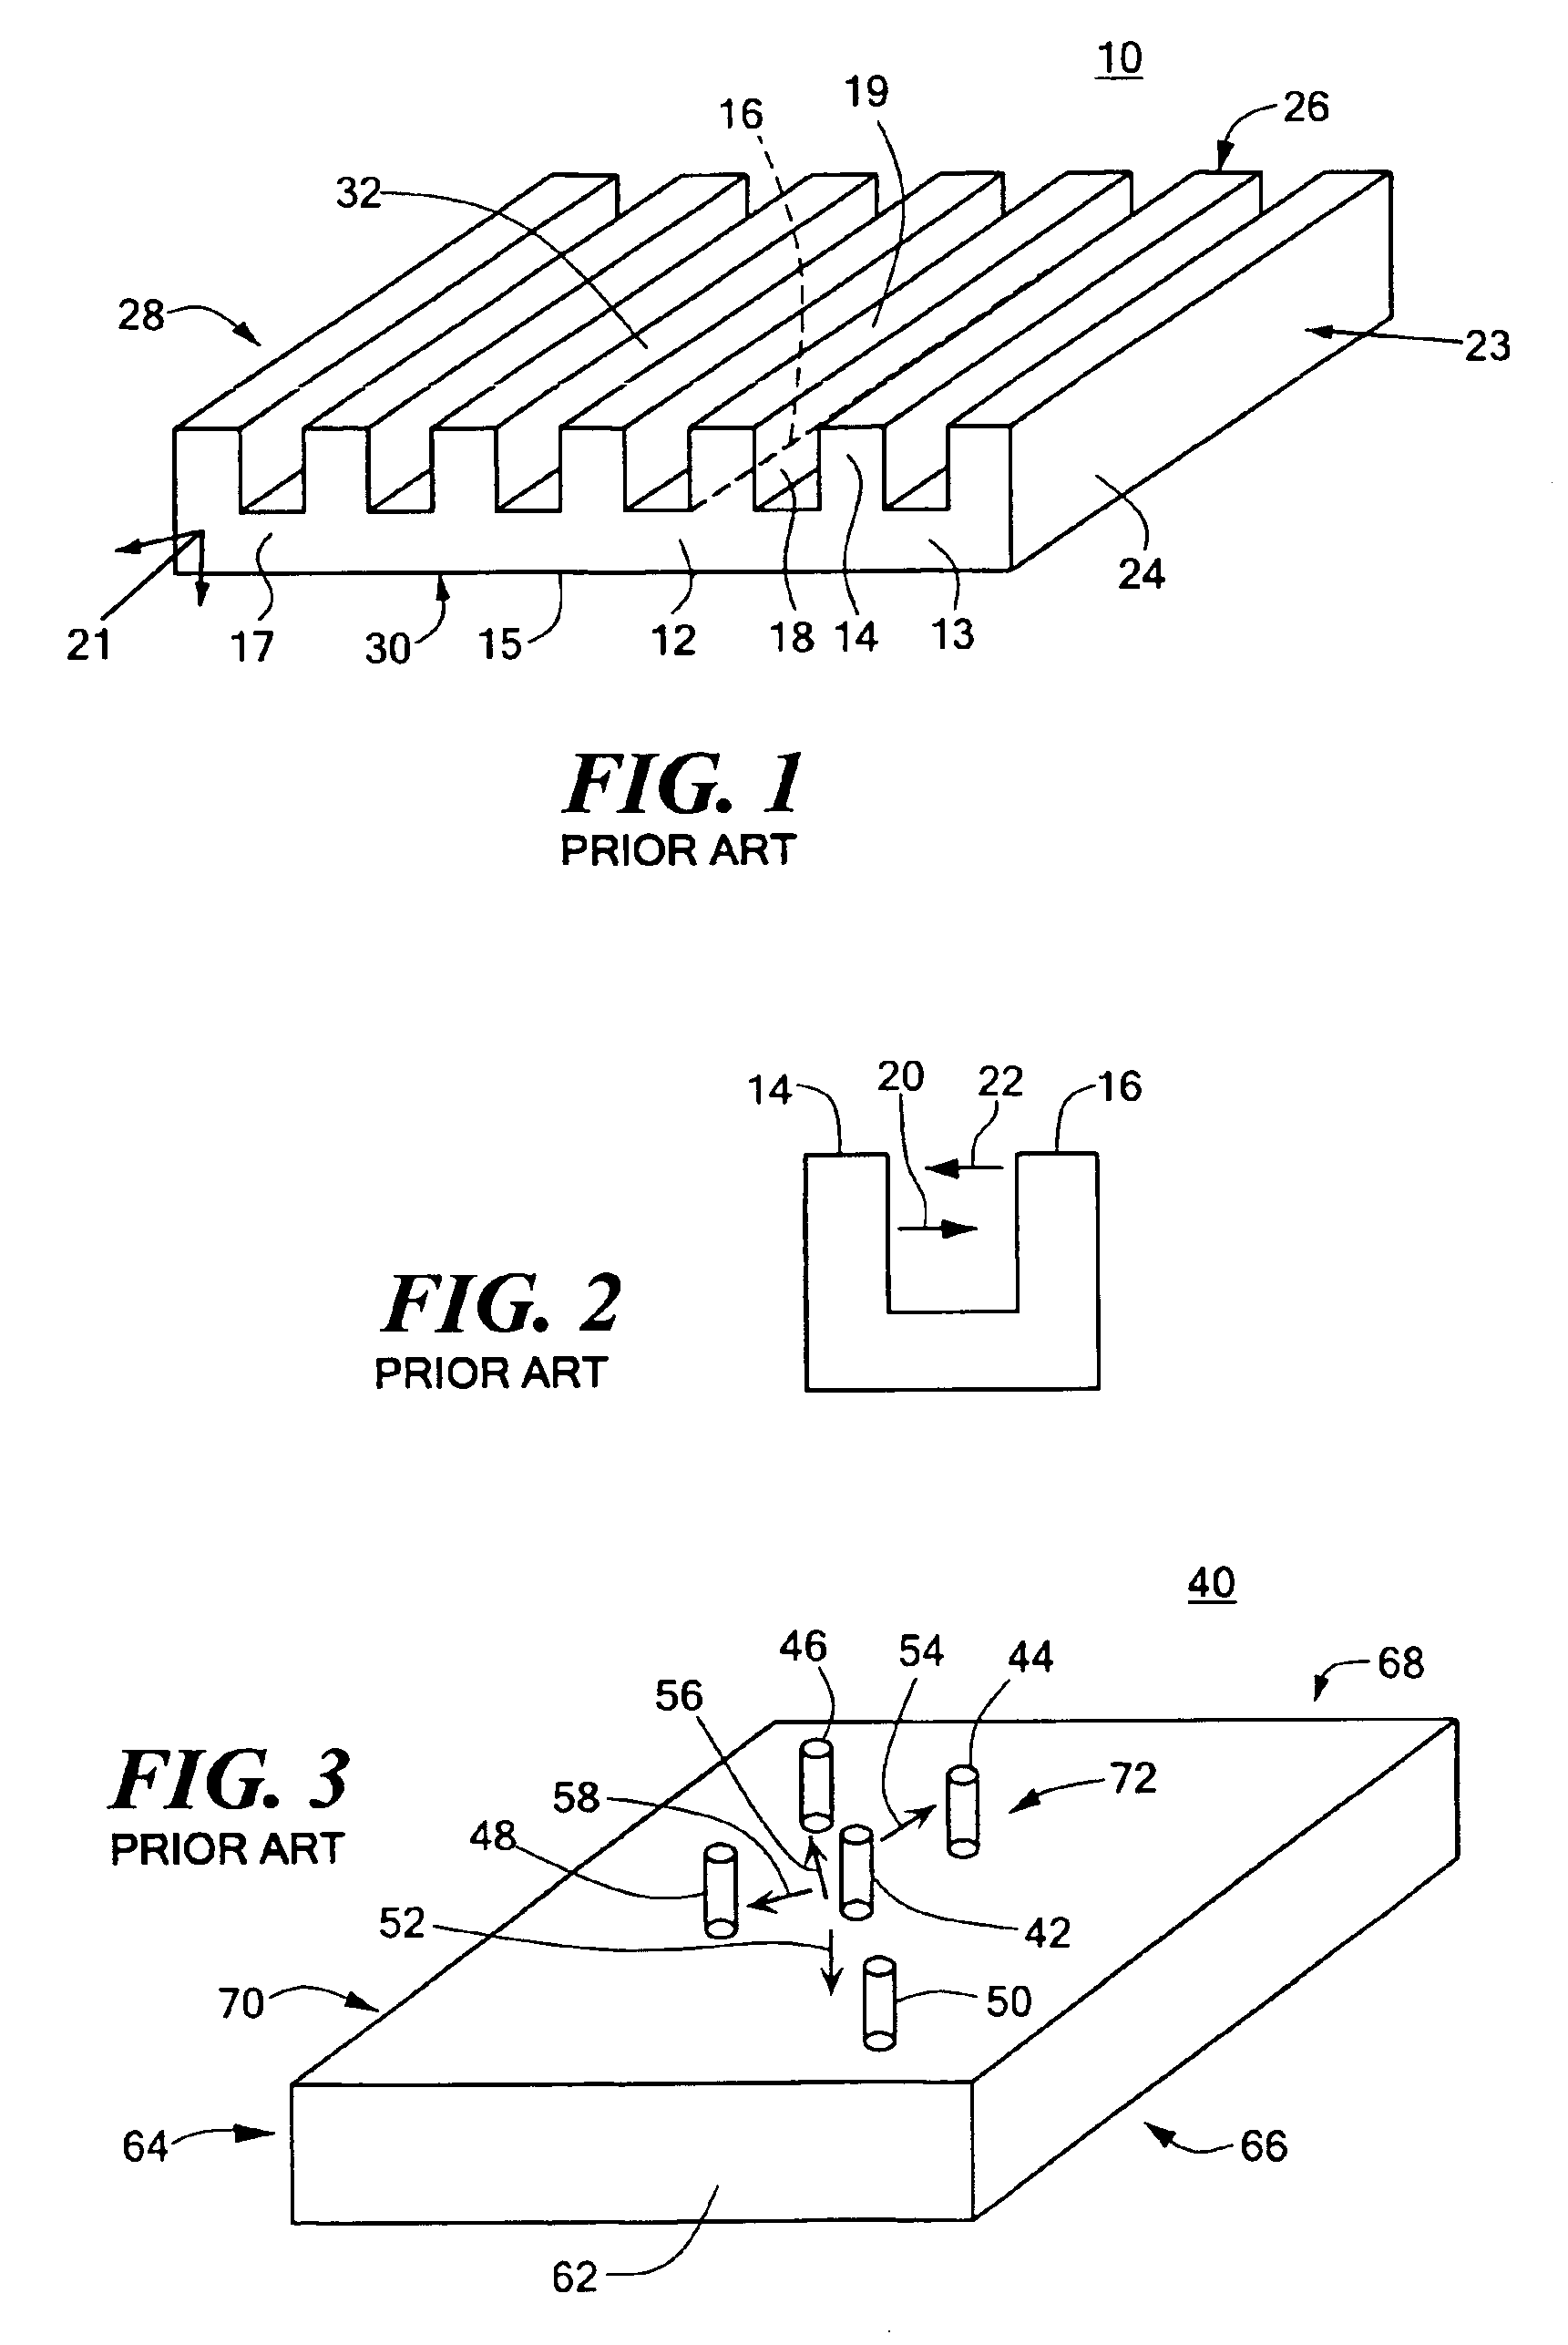 Uniform heat dissipating and cooling heat sink